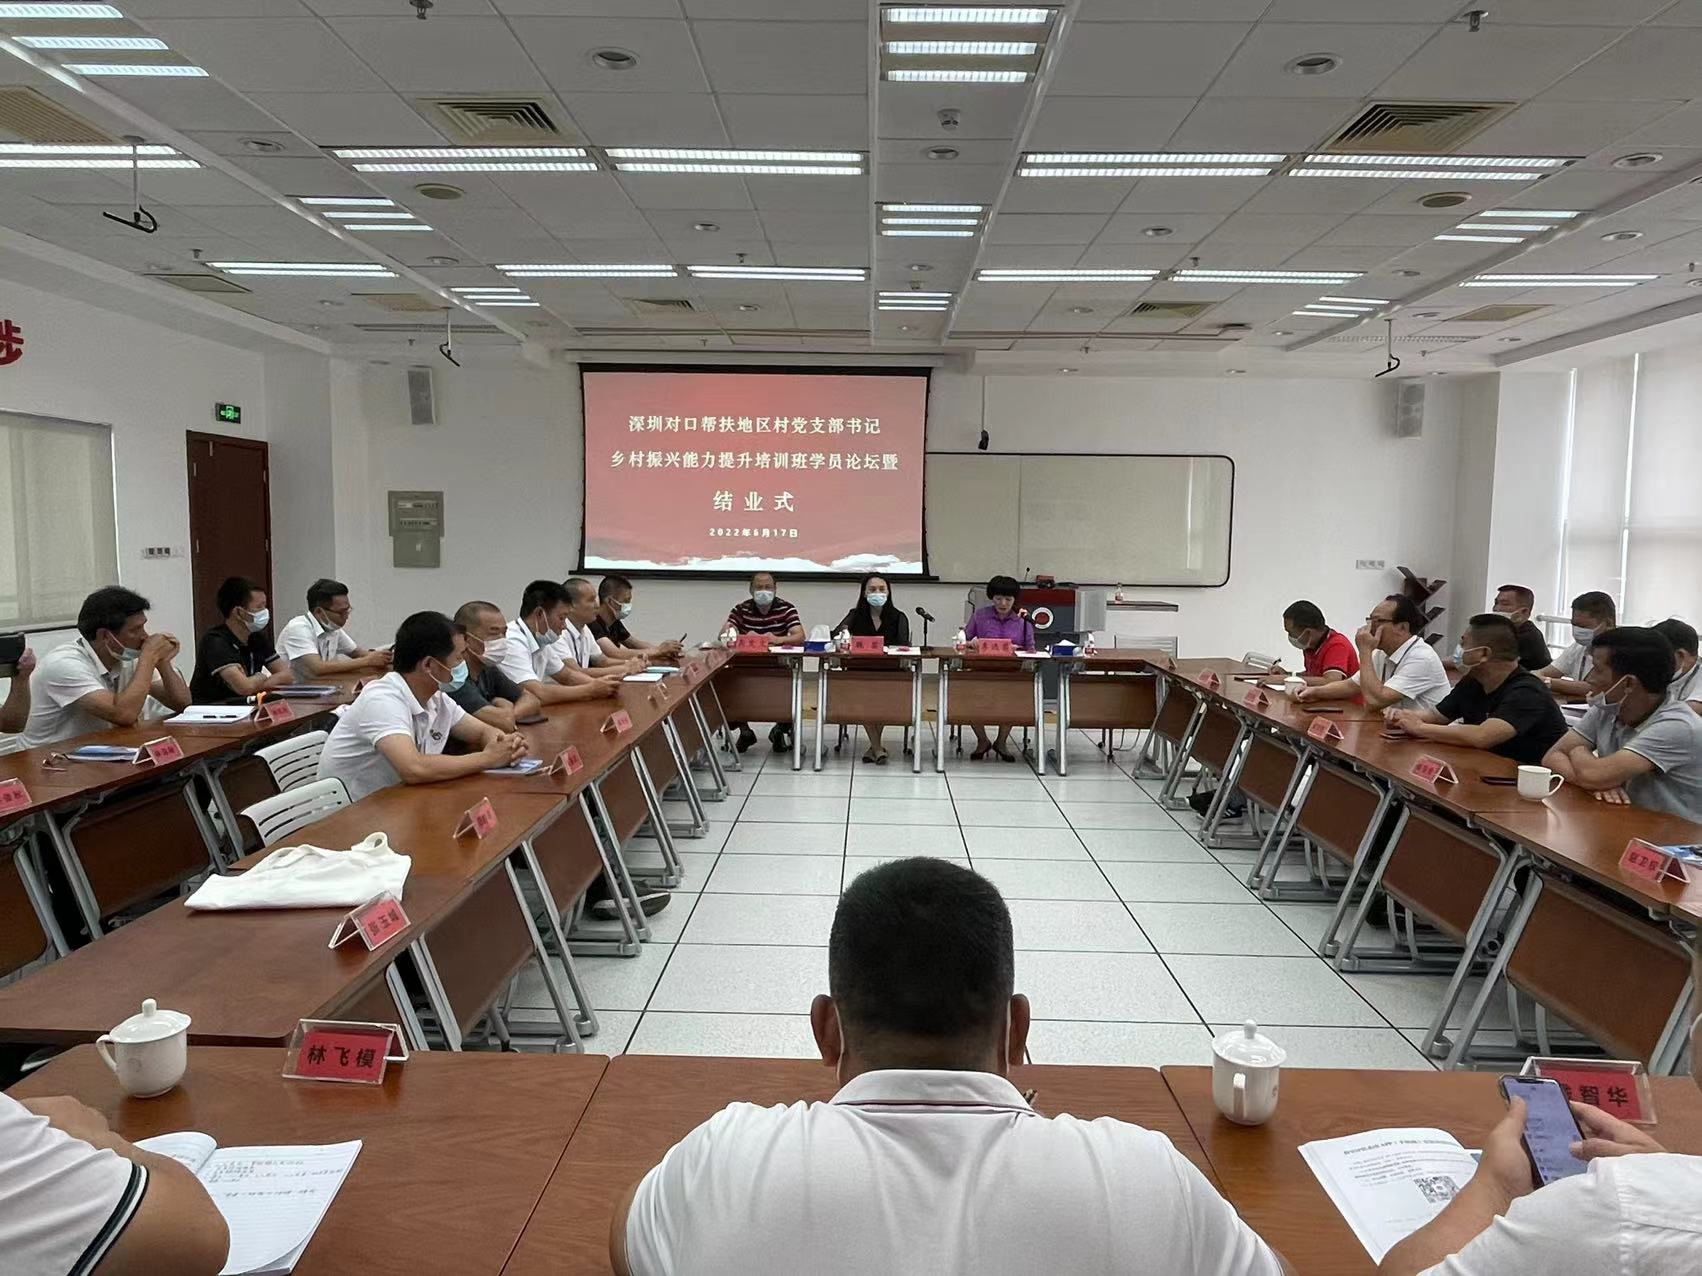  To "recharge" and "empower" local cadres for counterpart assistance - Shenzhen held a series of training courses on rural revitalization and grassroots governance